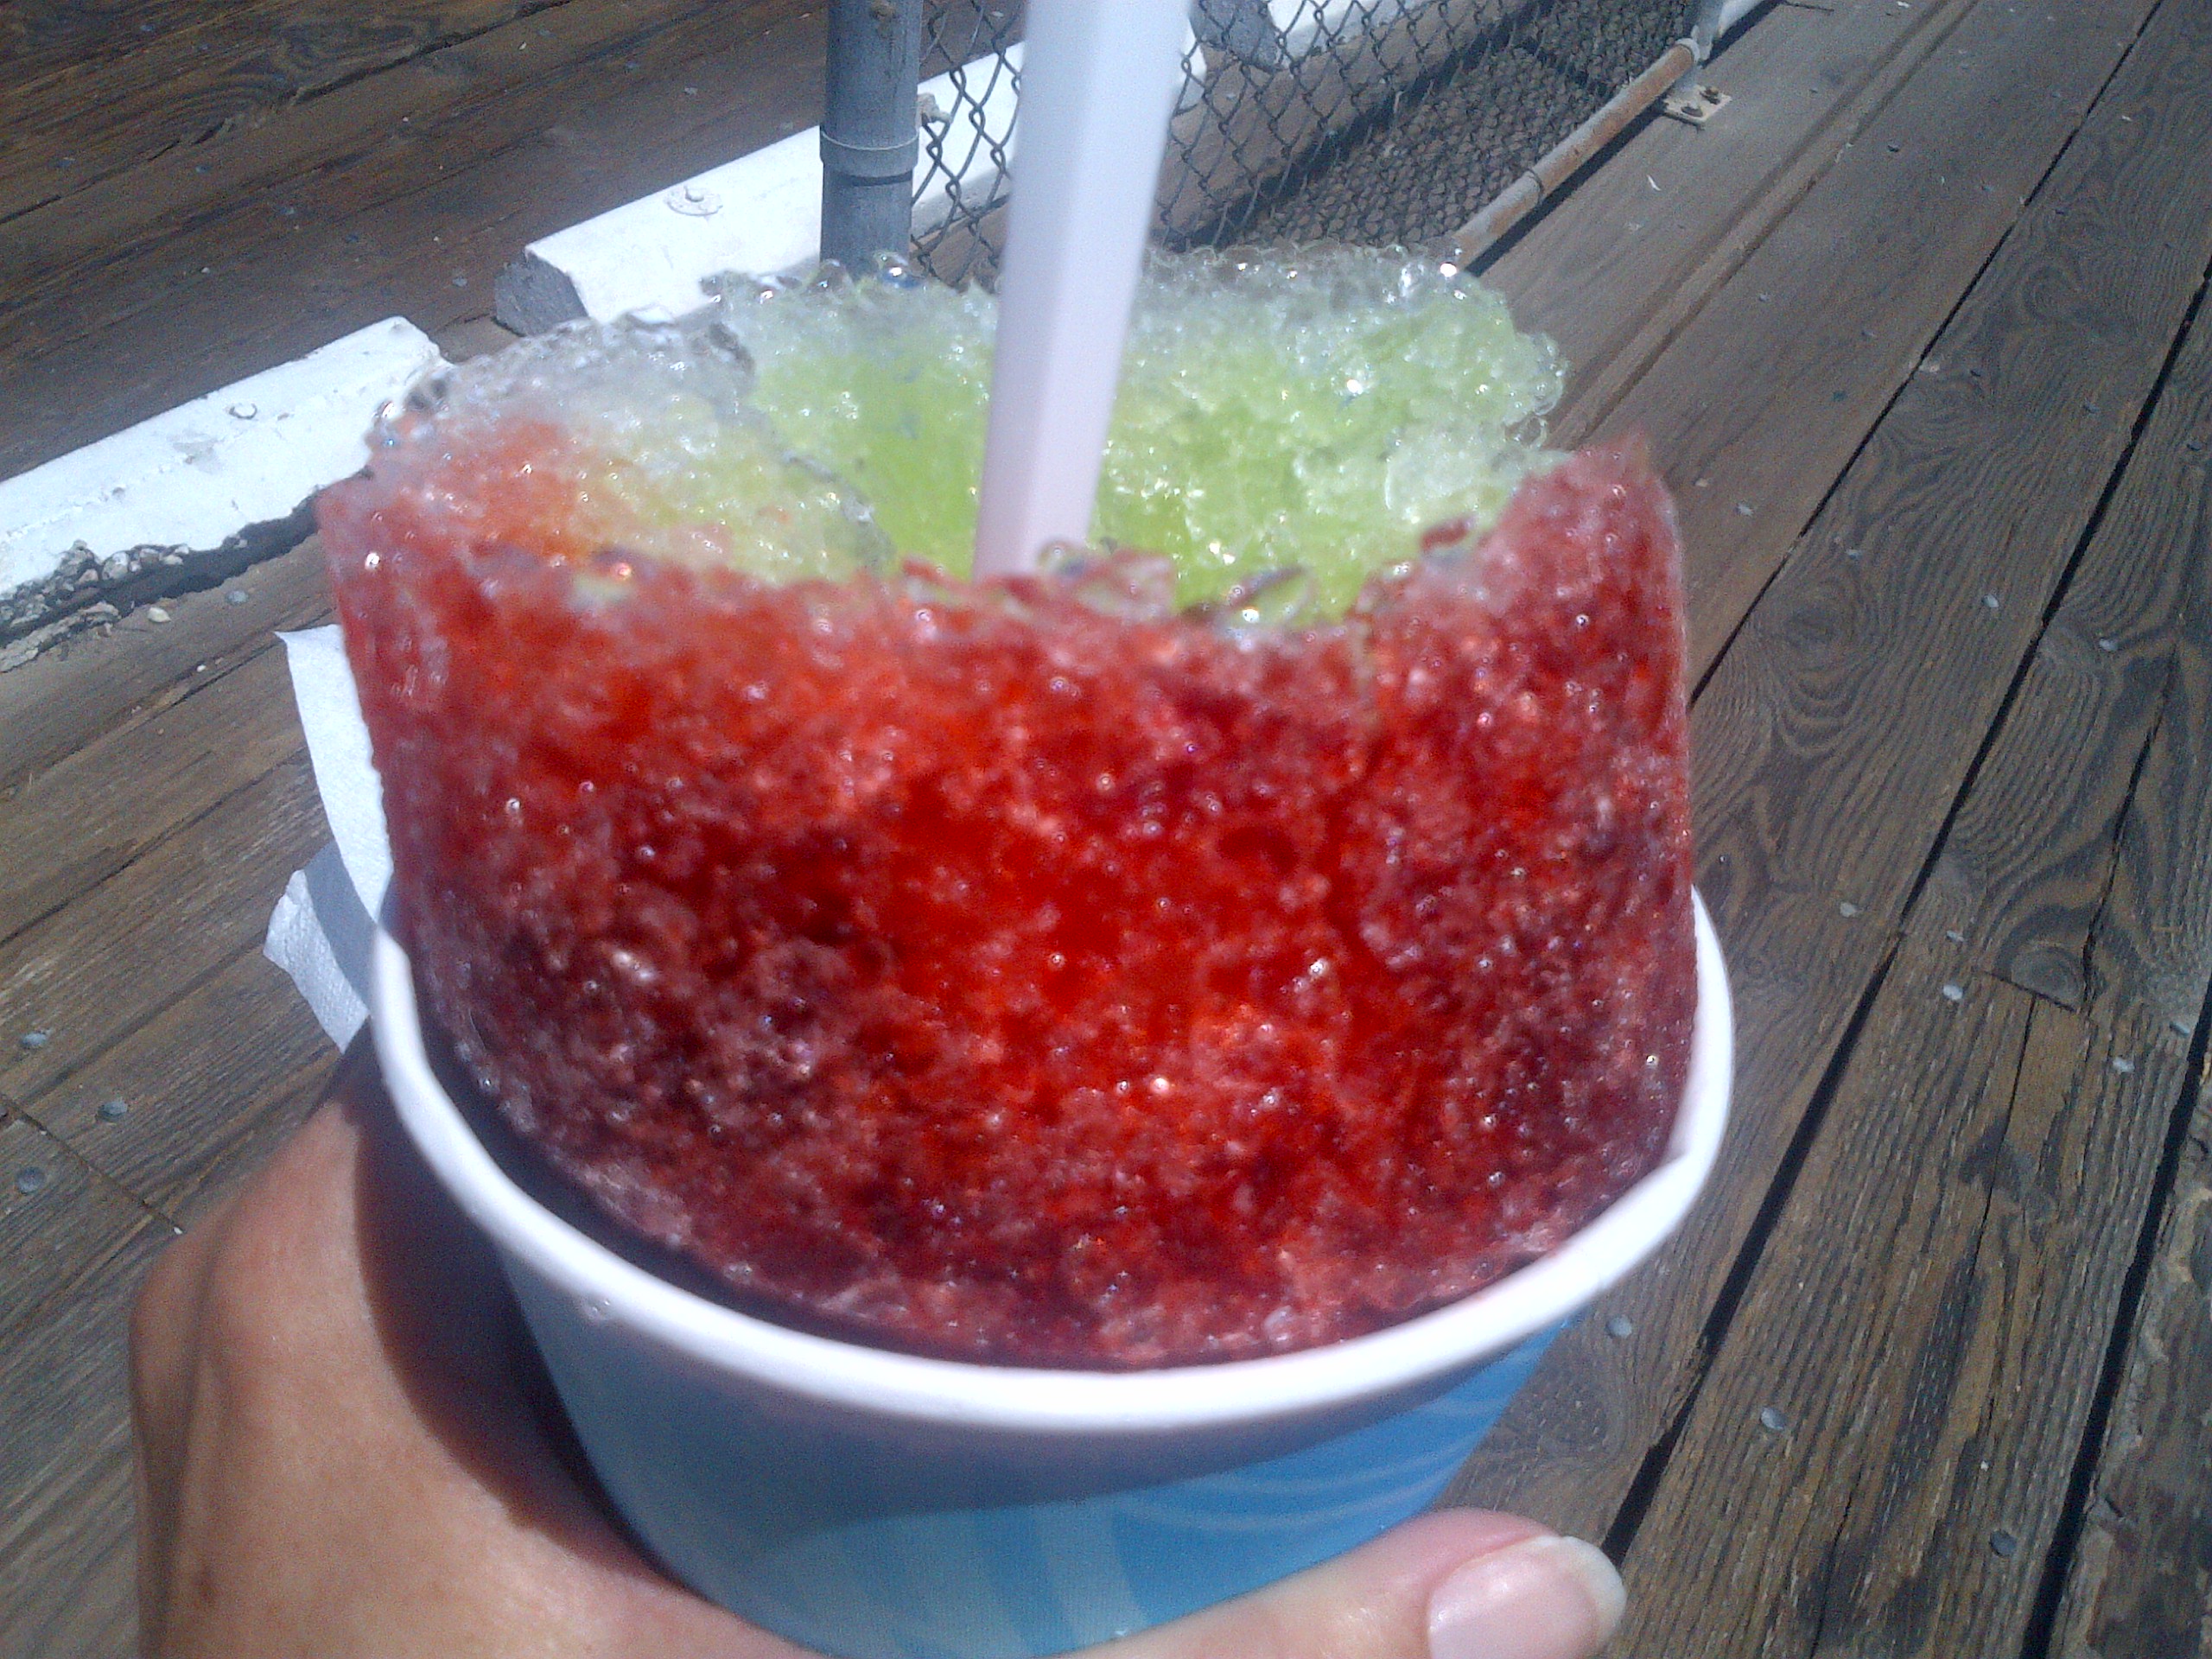 Picture of snow cone from Carilyn Johnson